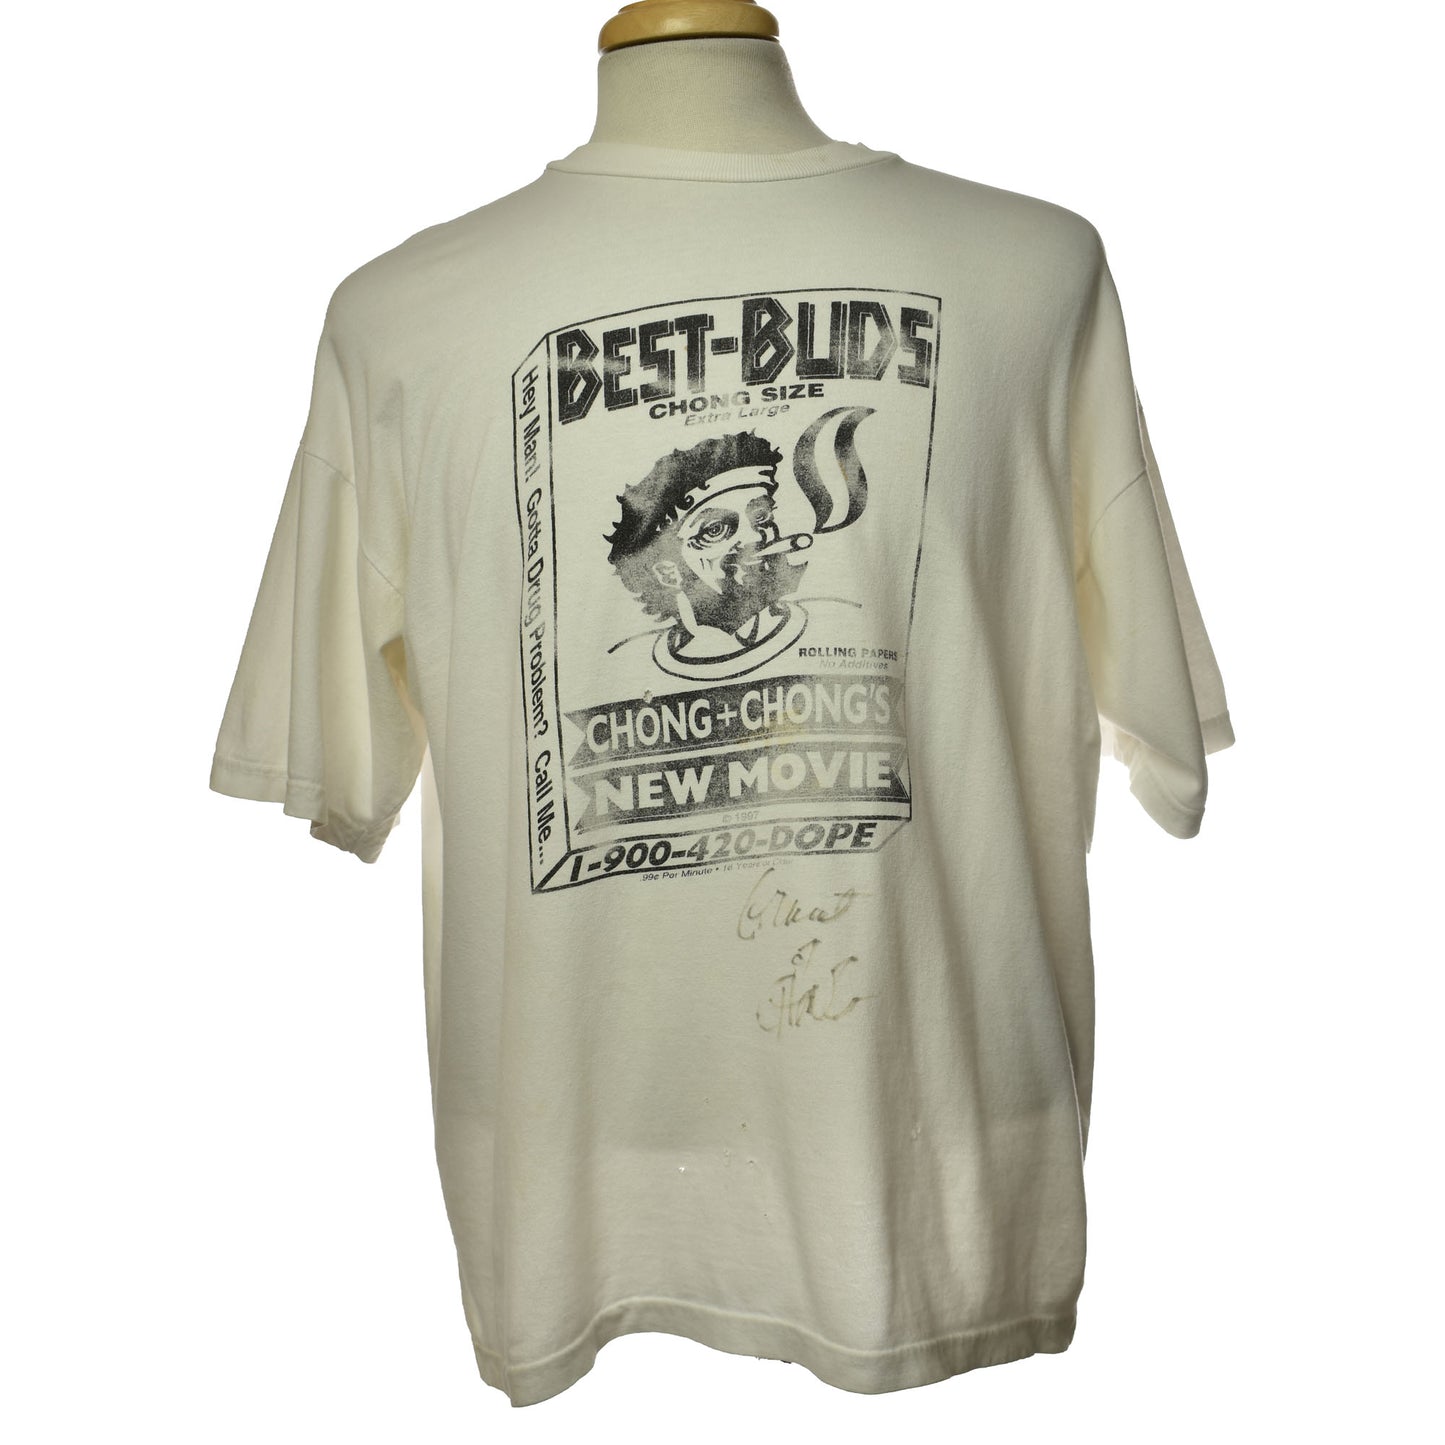 Vintage Very Rare 1997 Best Buds Chong + Chong's Graphic Promo Movie Signed T-shirt